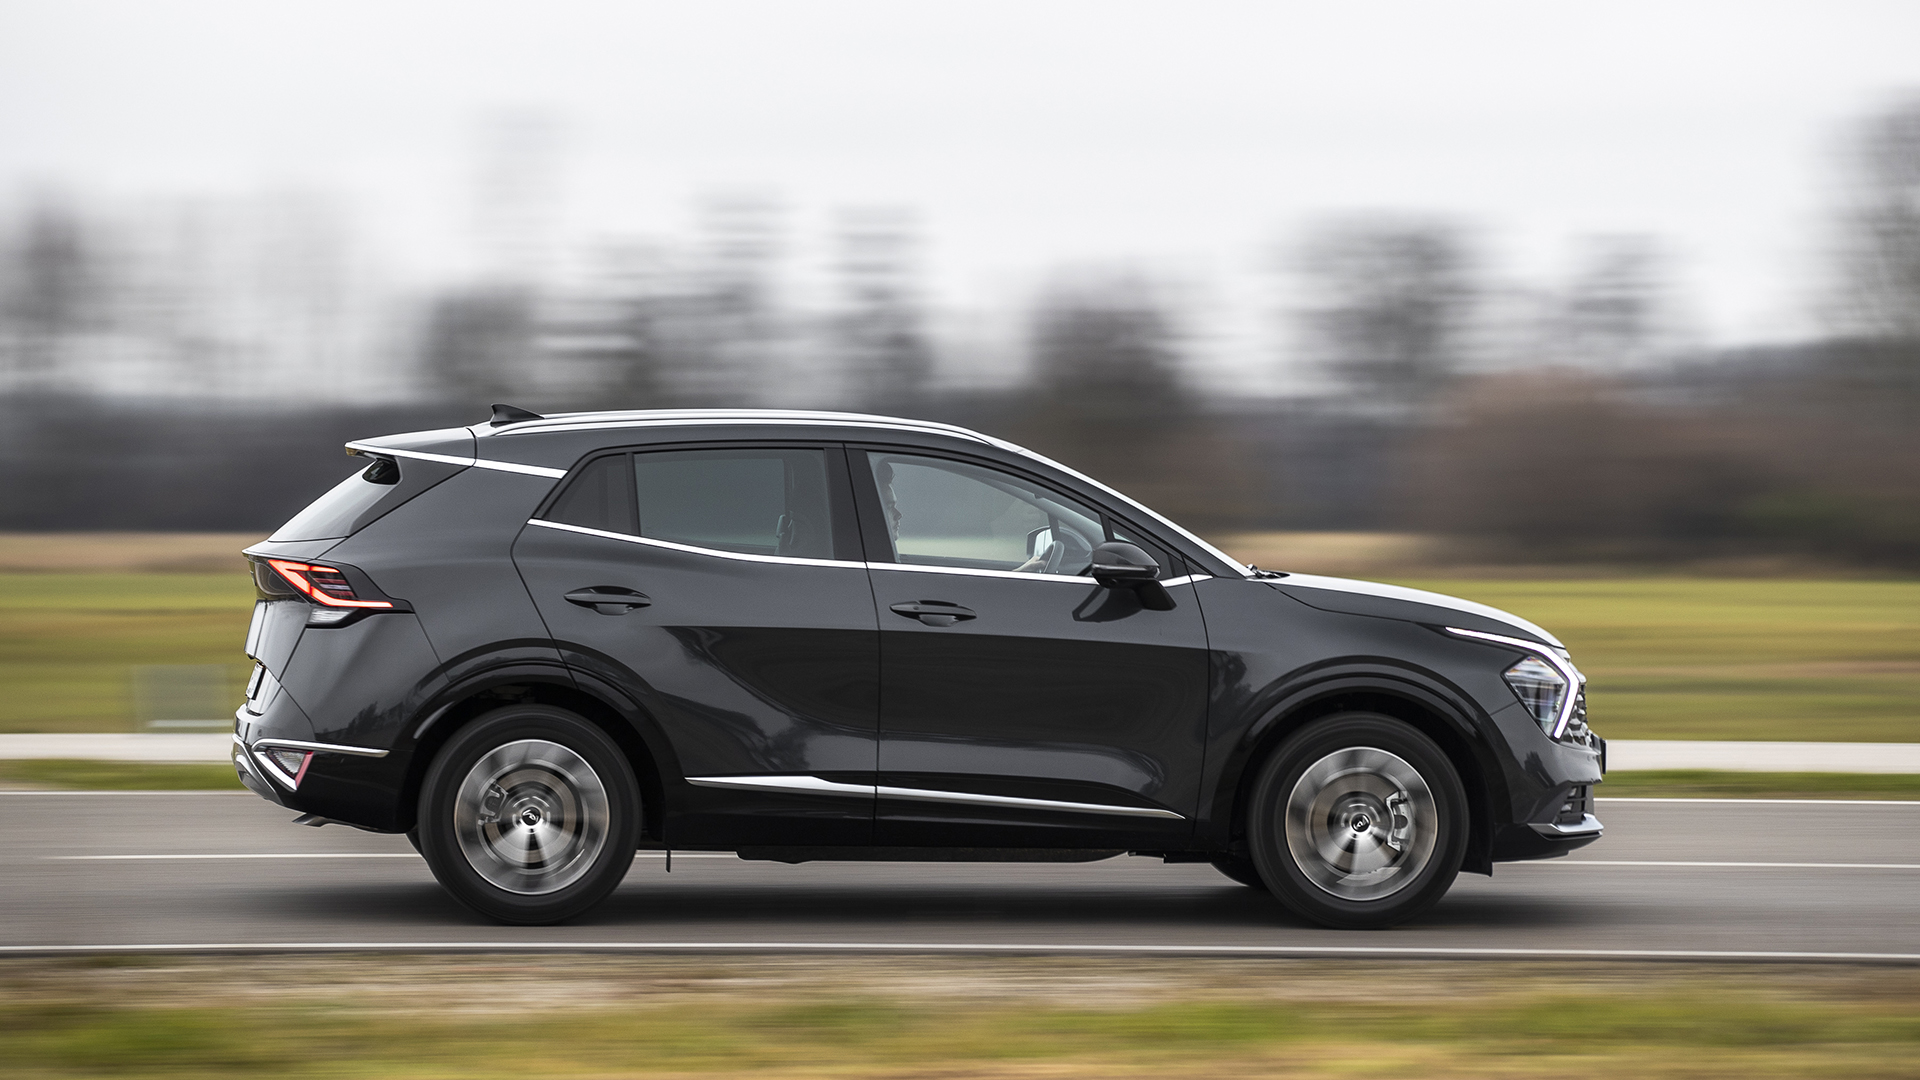 Kia Sportage 2023 in Flado in motion on the road